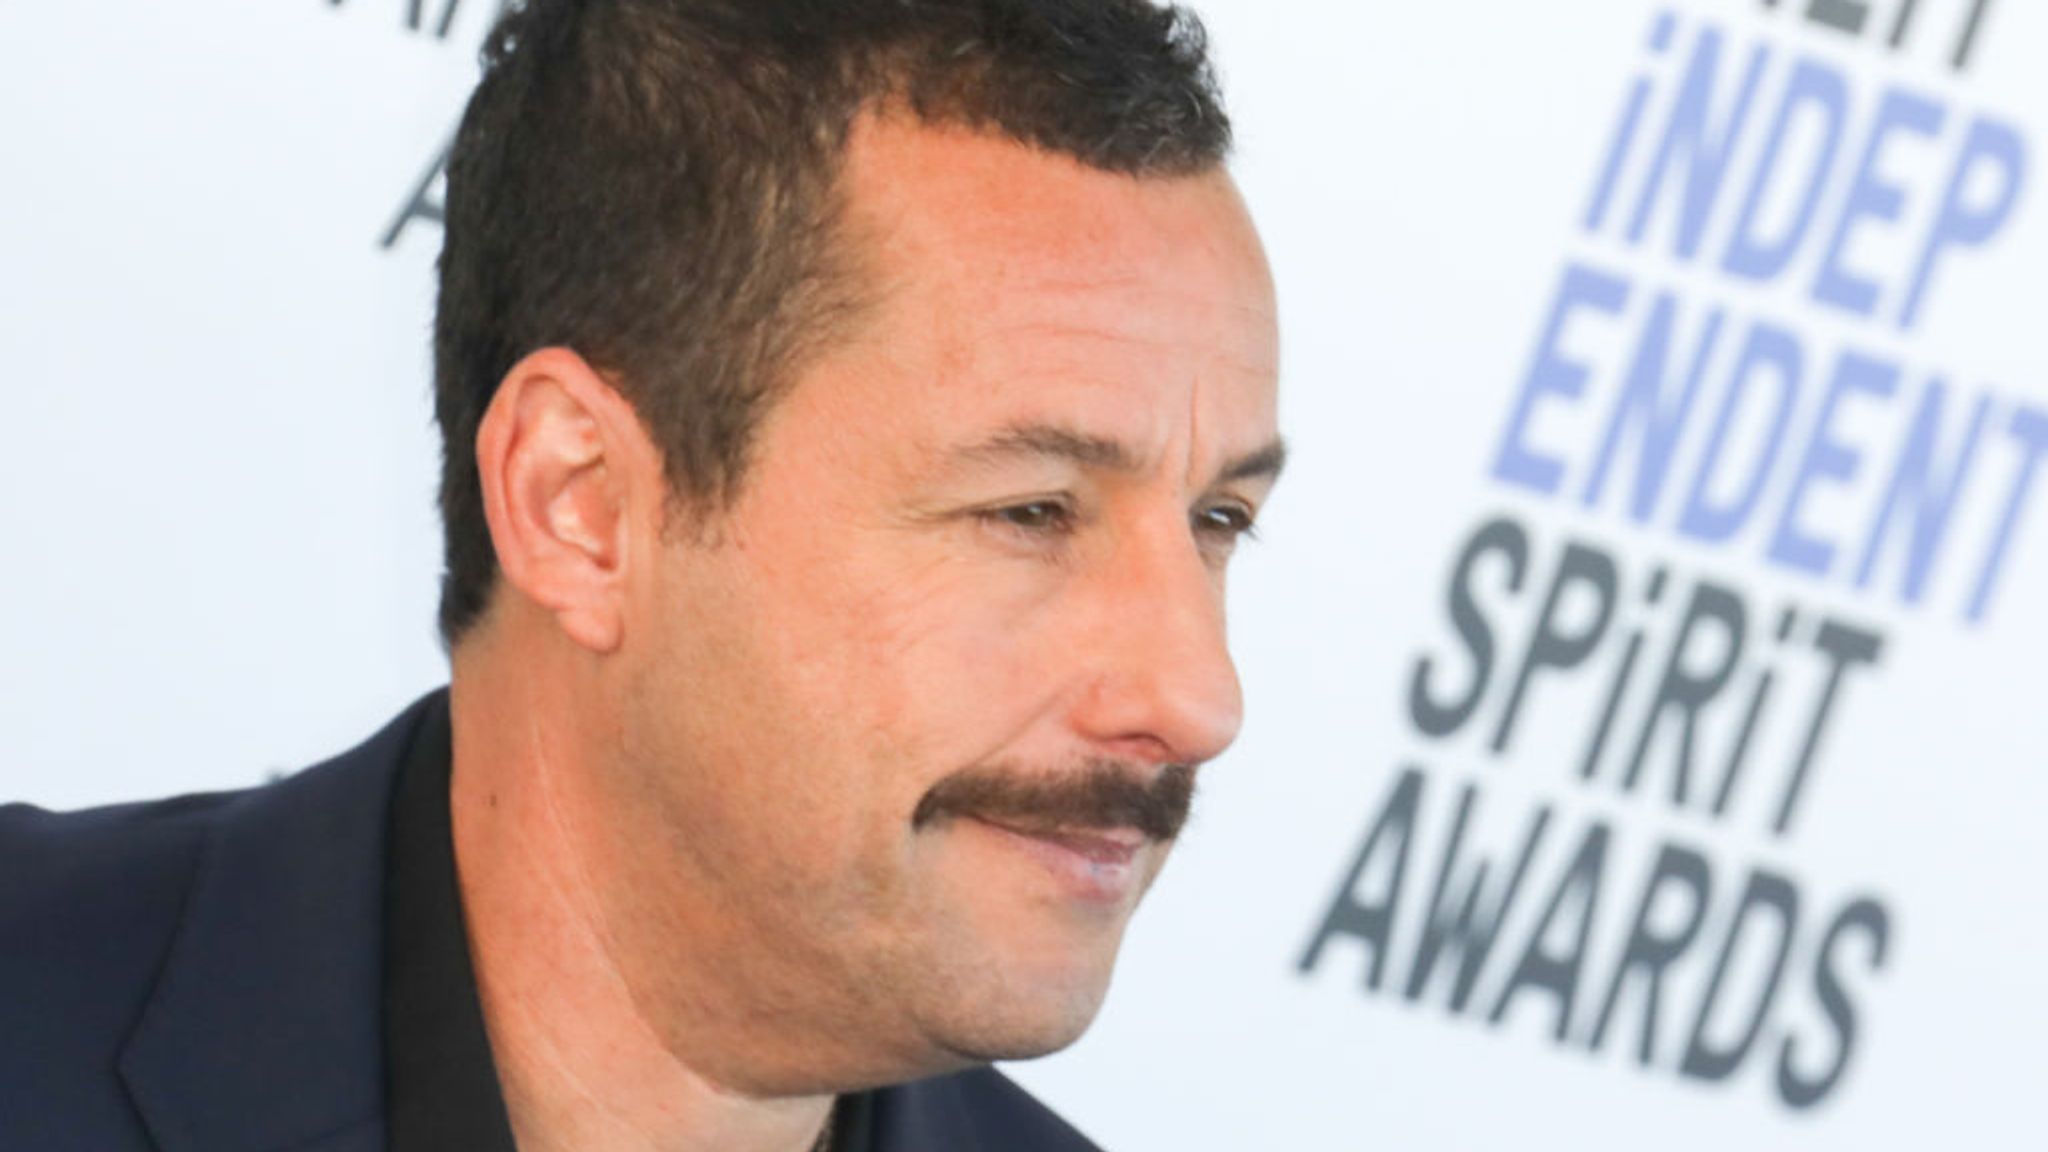 Adam Sandler is well known for hit comedy movies including Happy Gilmore and Mr Deeds